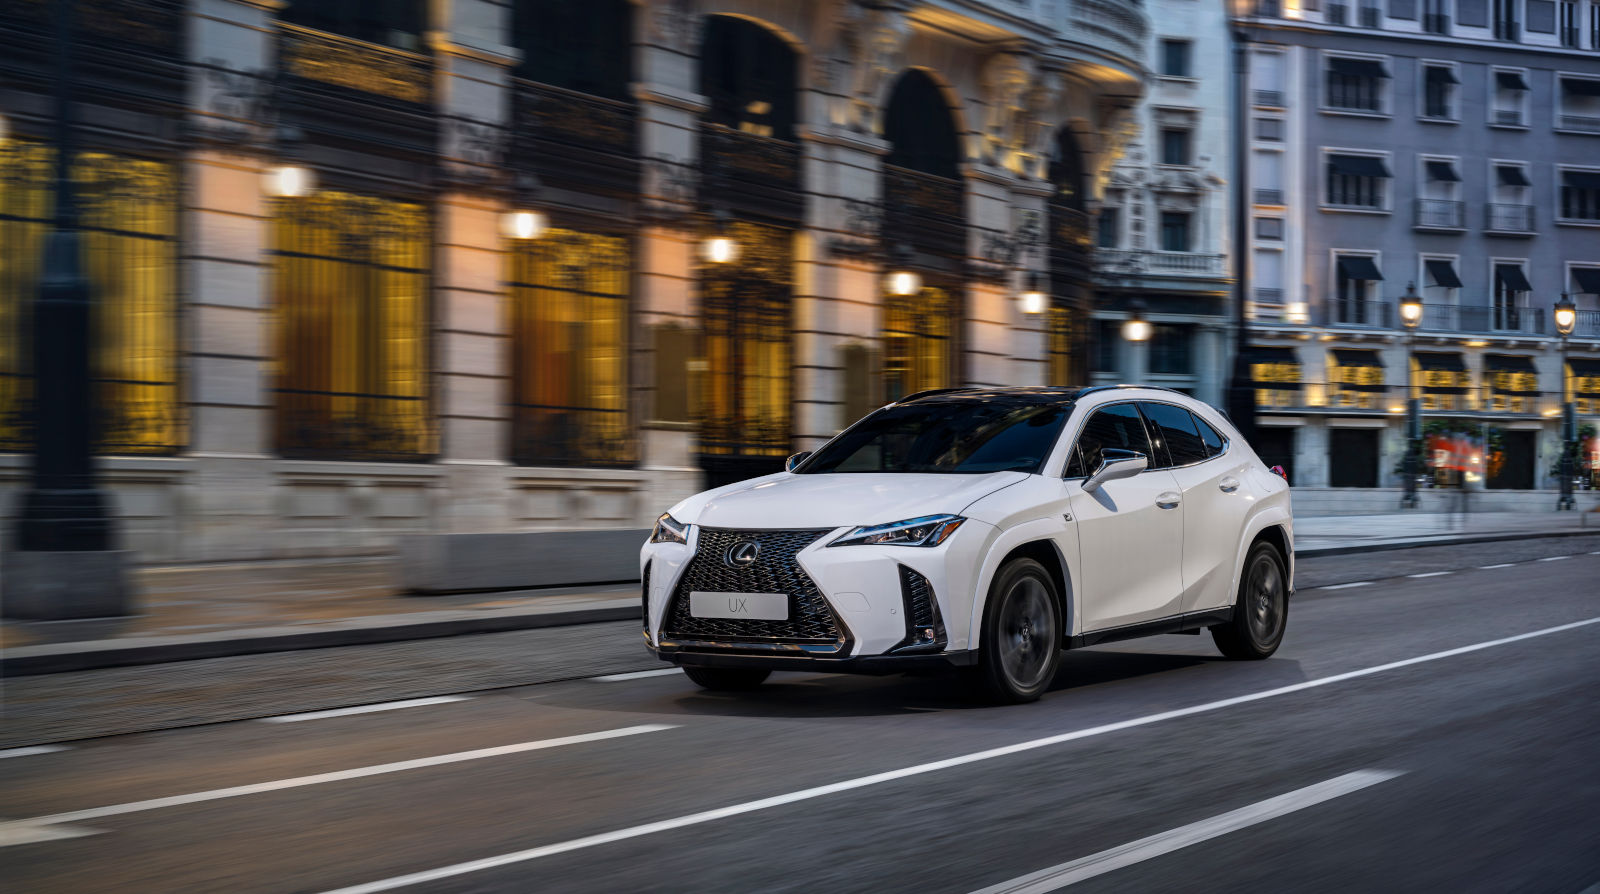 Here are Three Things that Make the 2023 Lexus UX Stand Out